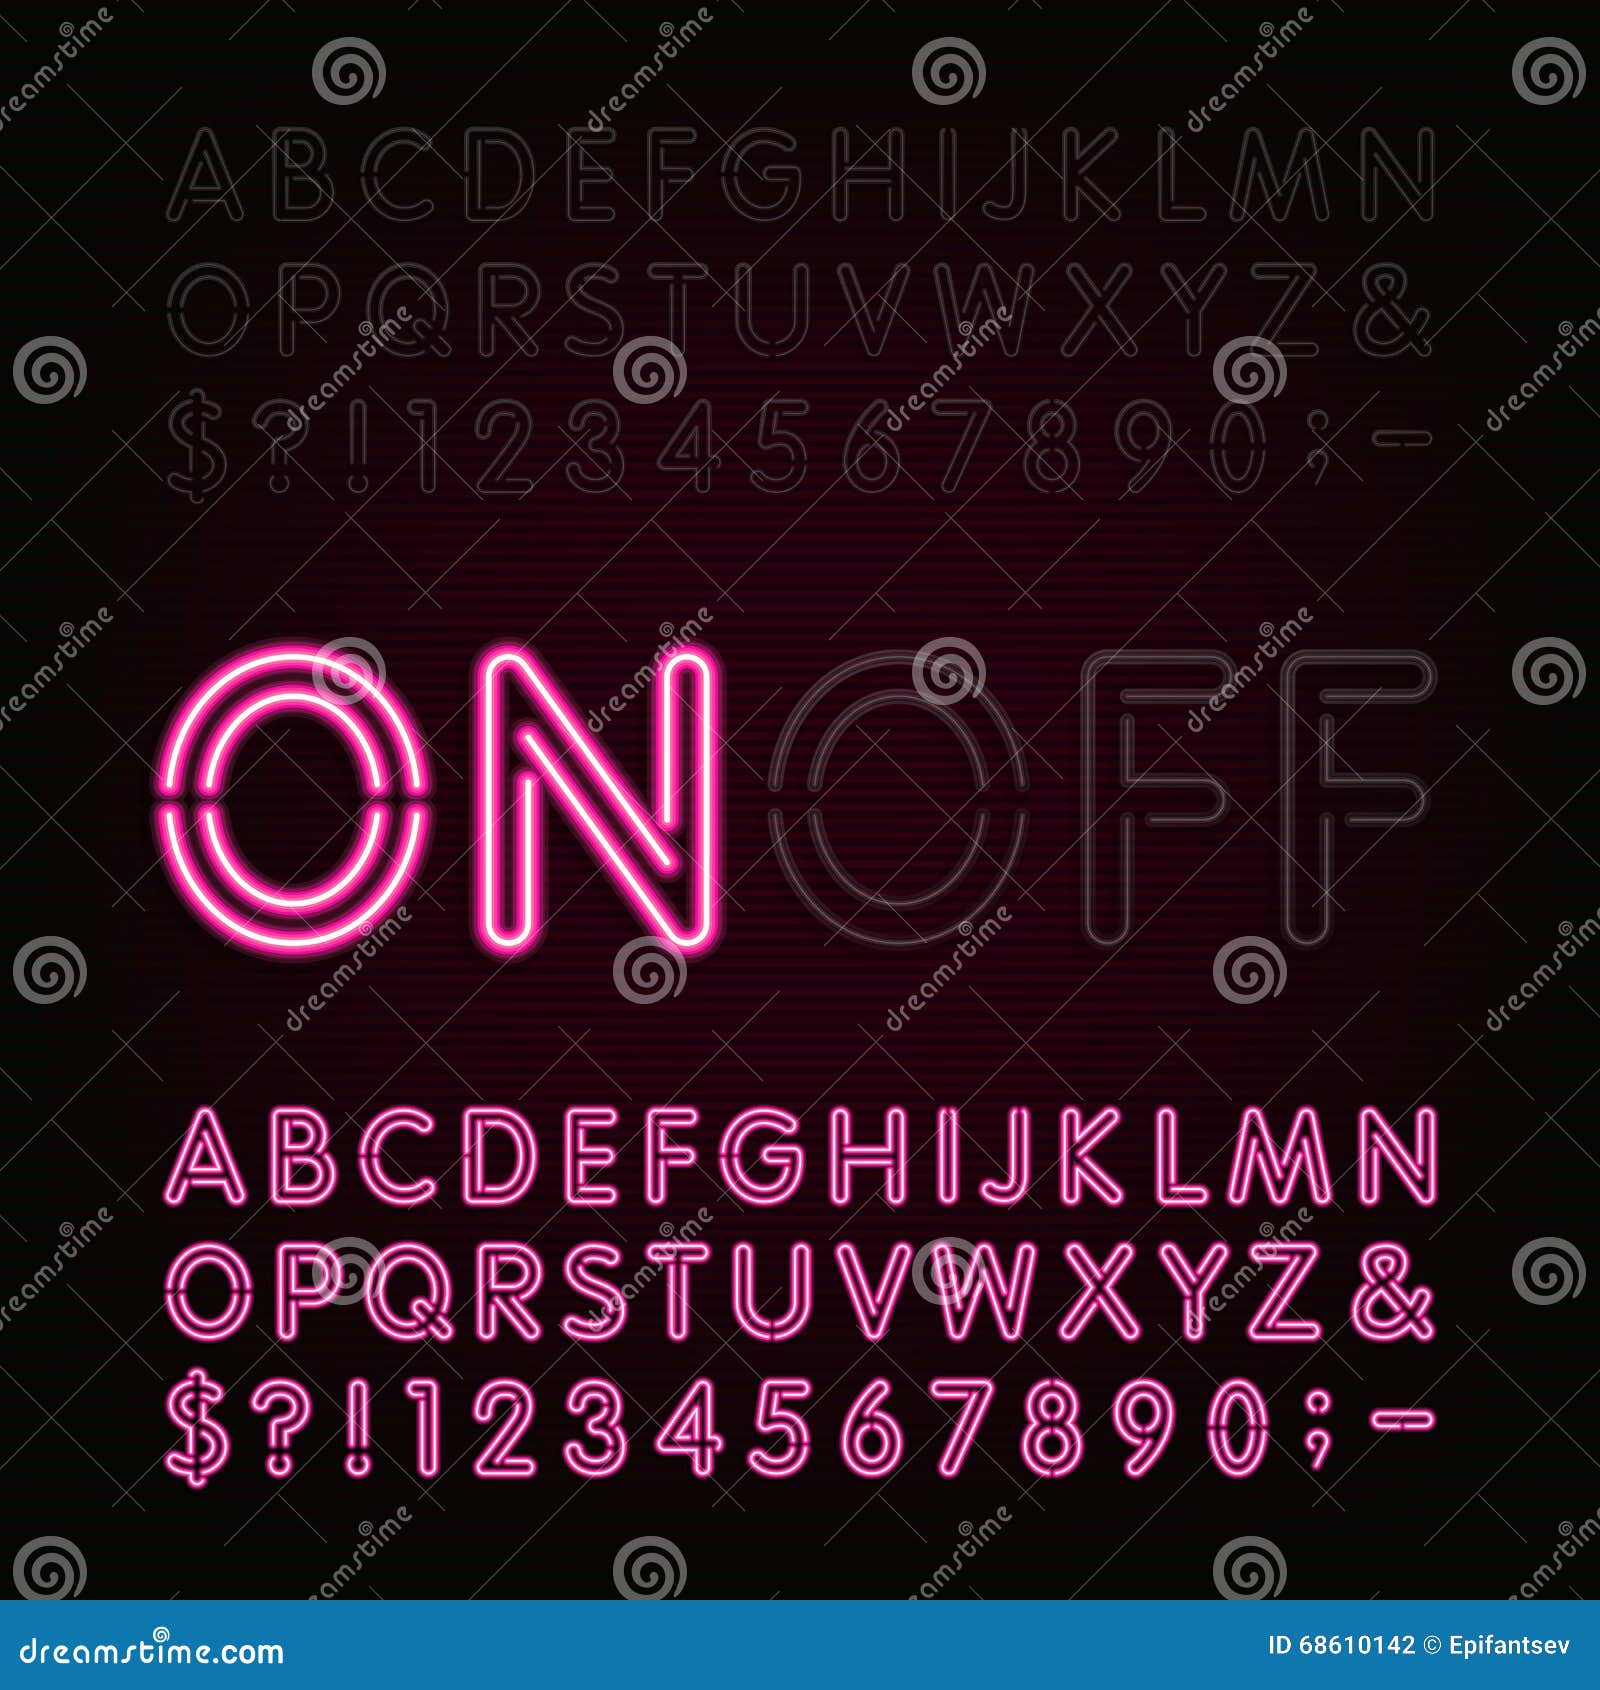 Neon Light Alphabet Font. Two Different Styles. Lights on or Off ...